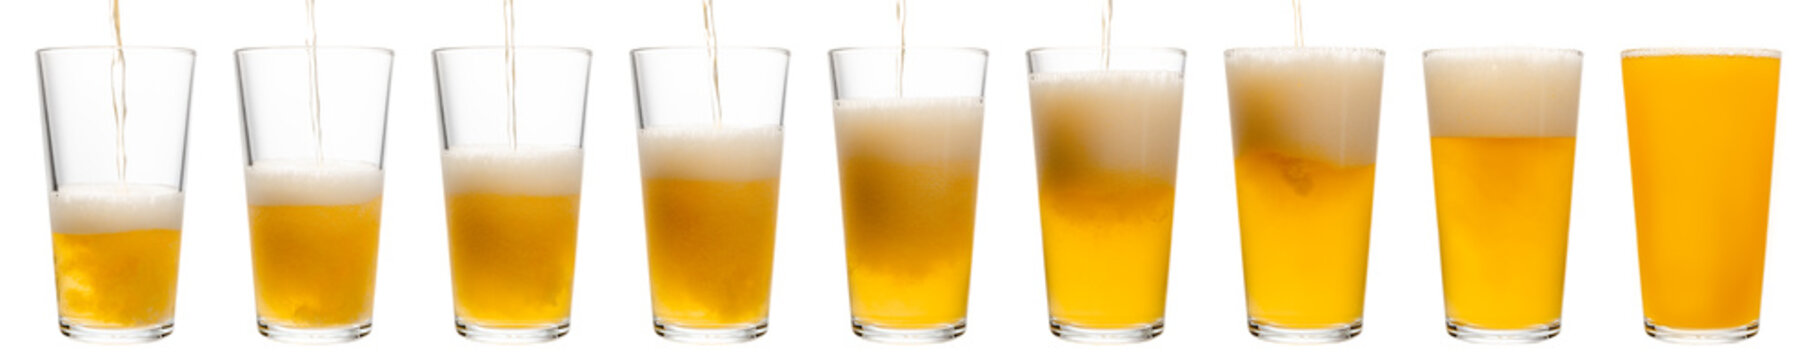 Pouring beer in shaker pint glass isolated